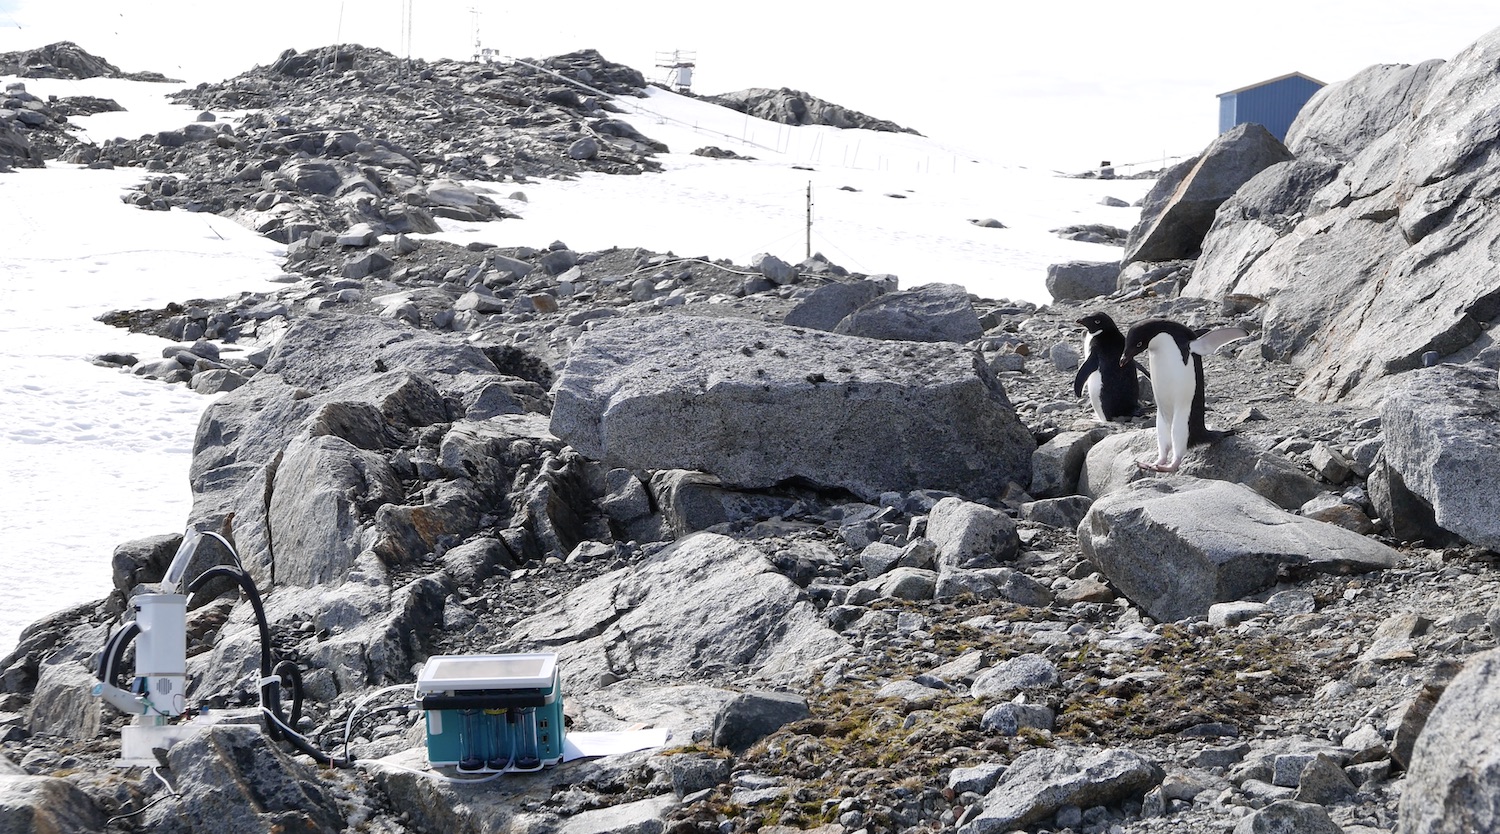 Curious penguins checking on instruments